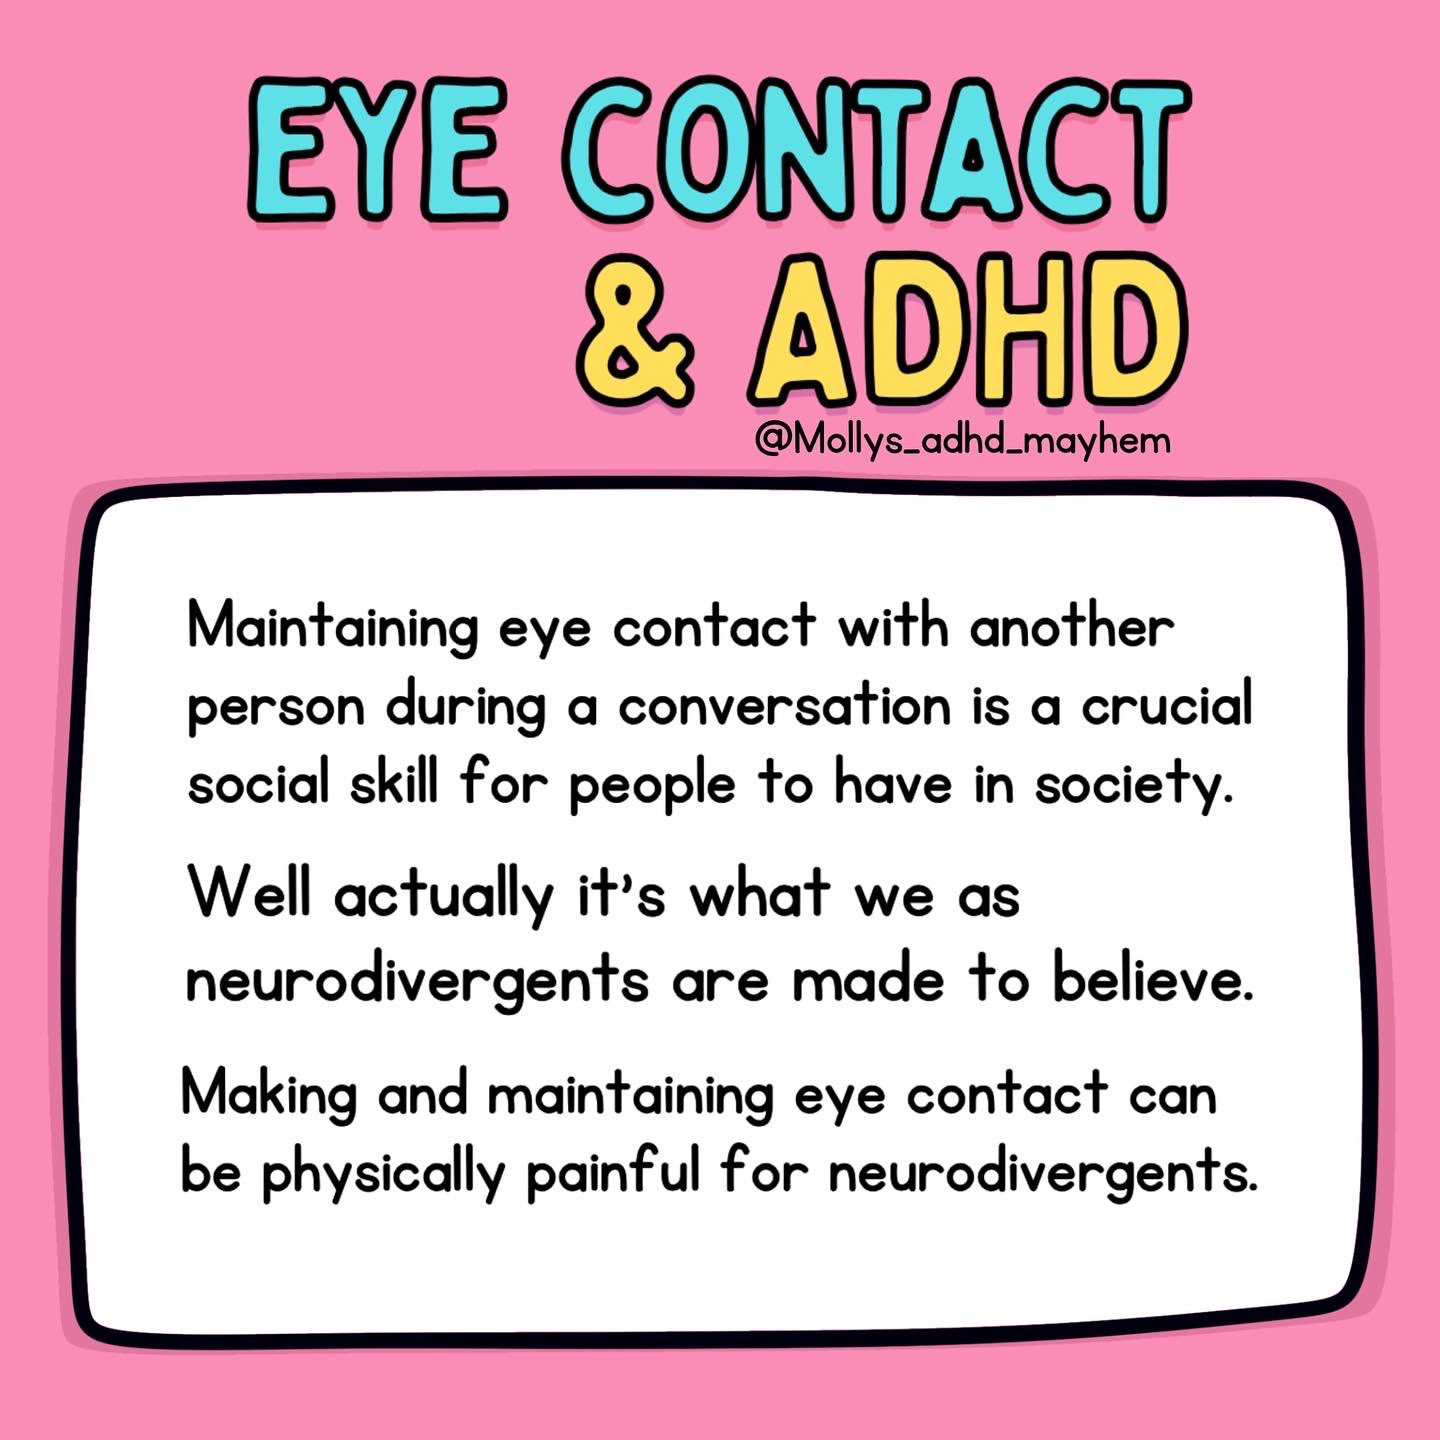 Why do people with ADHD struggle with eye contact?